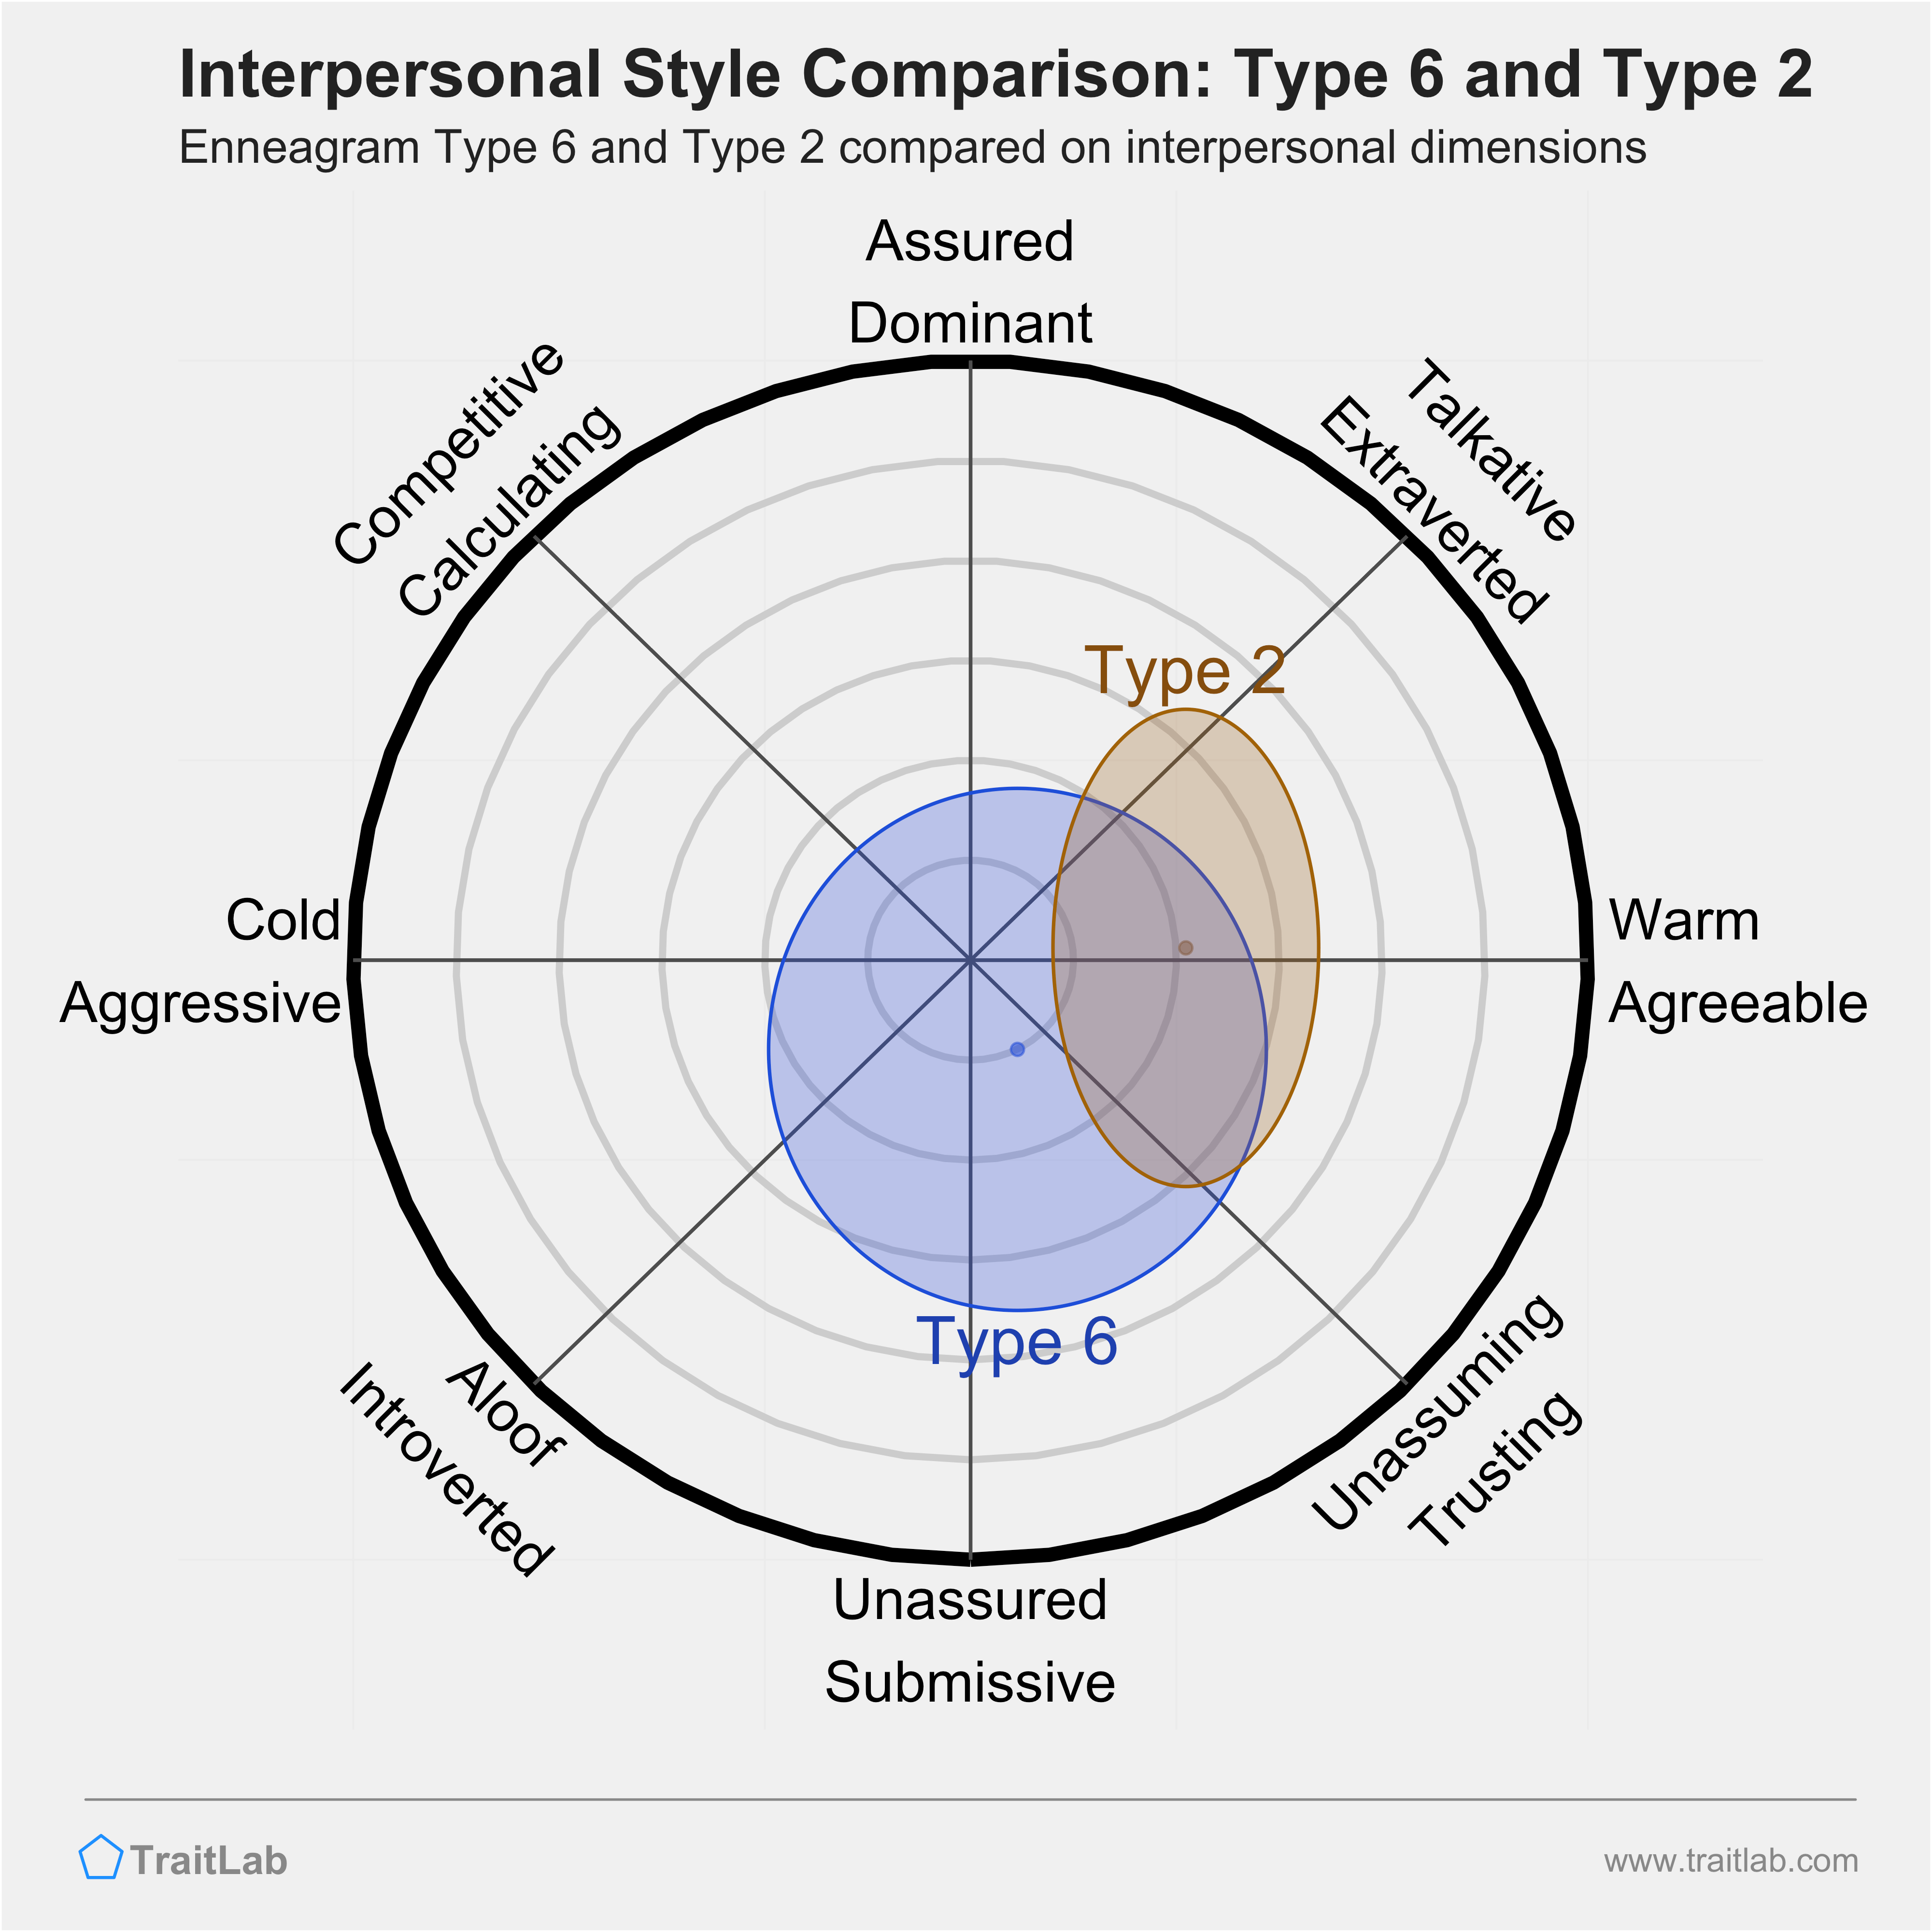 Enneagram Type 6 and Type 2 comparison across interpersonal dimensions